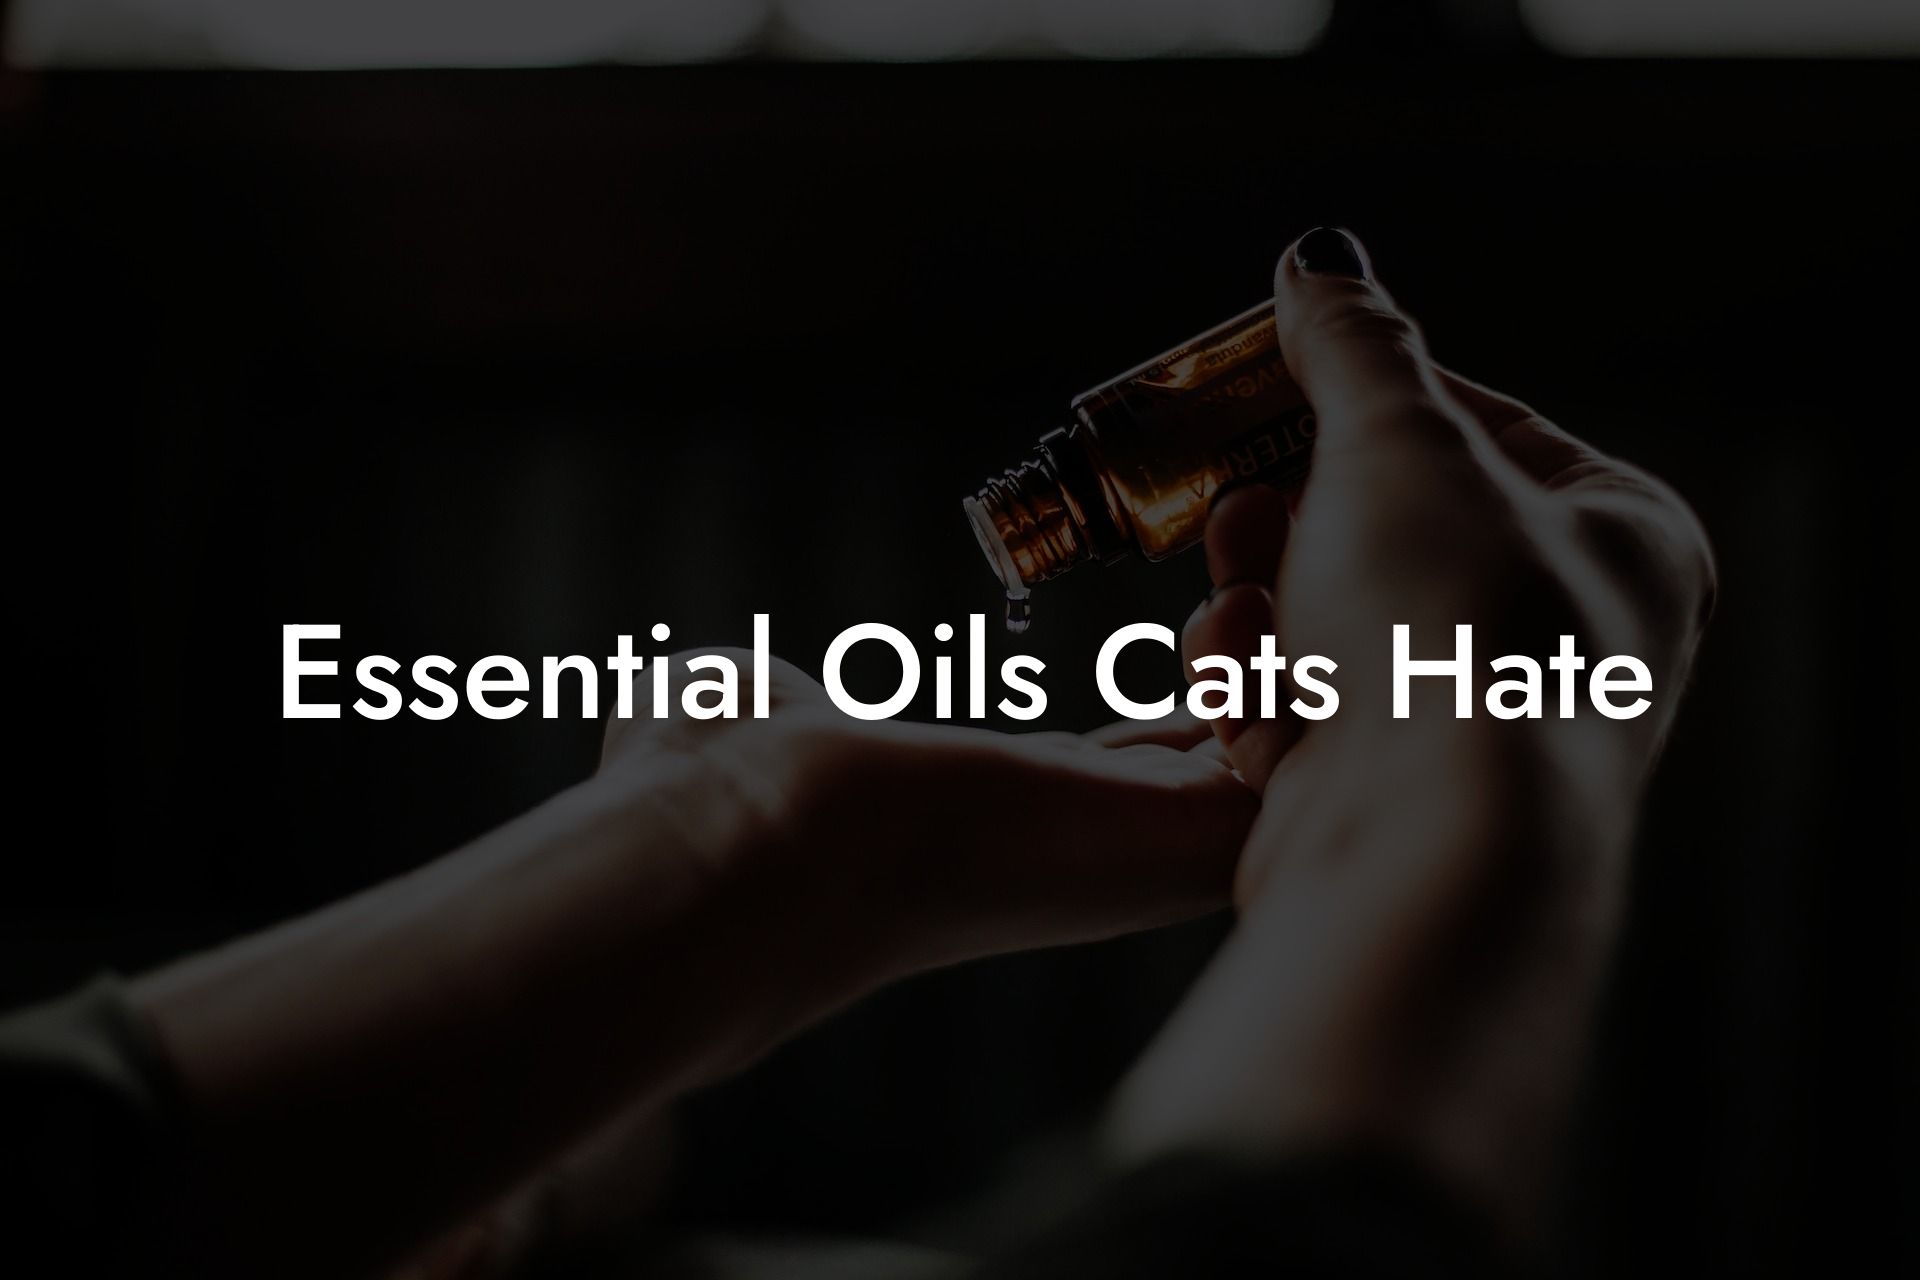 Essential Oils Cats Hate